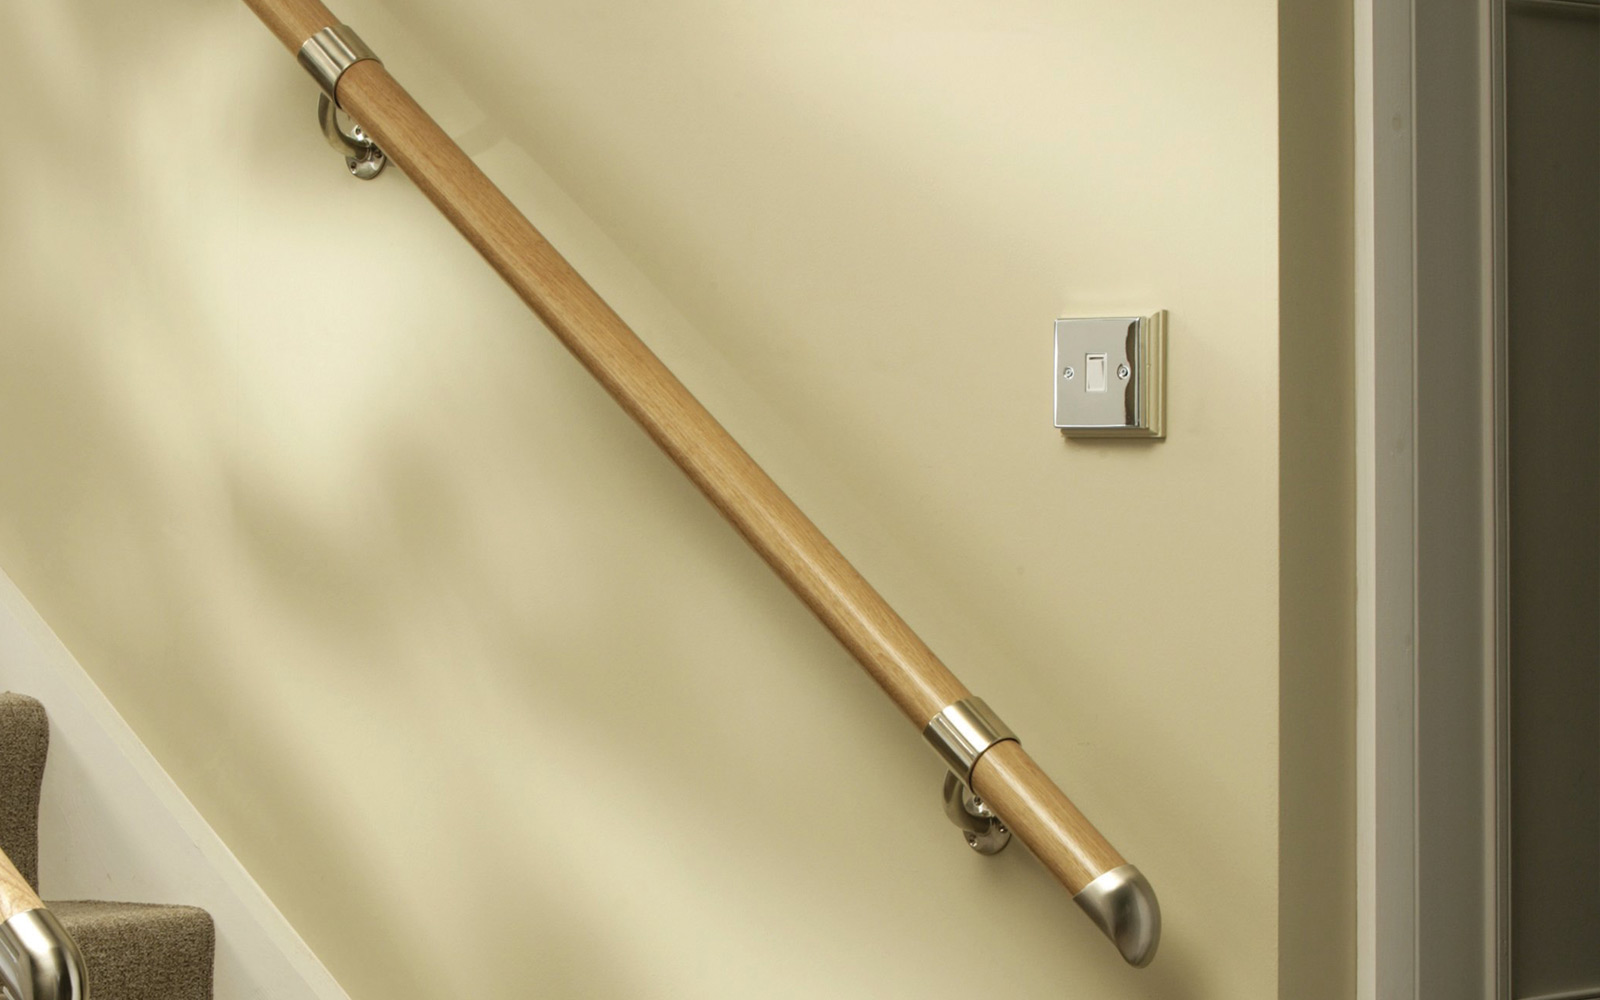 Wall Mounted Wooden Handrail Kits - Available In White Oak ...